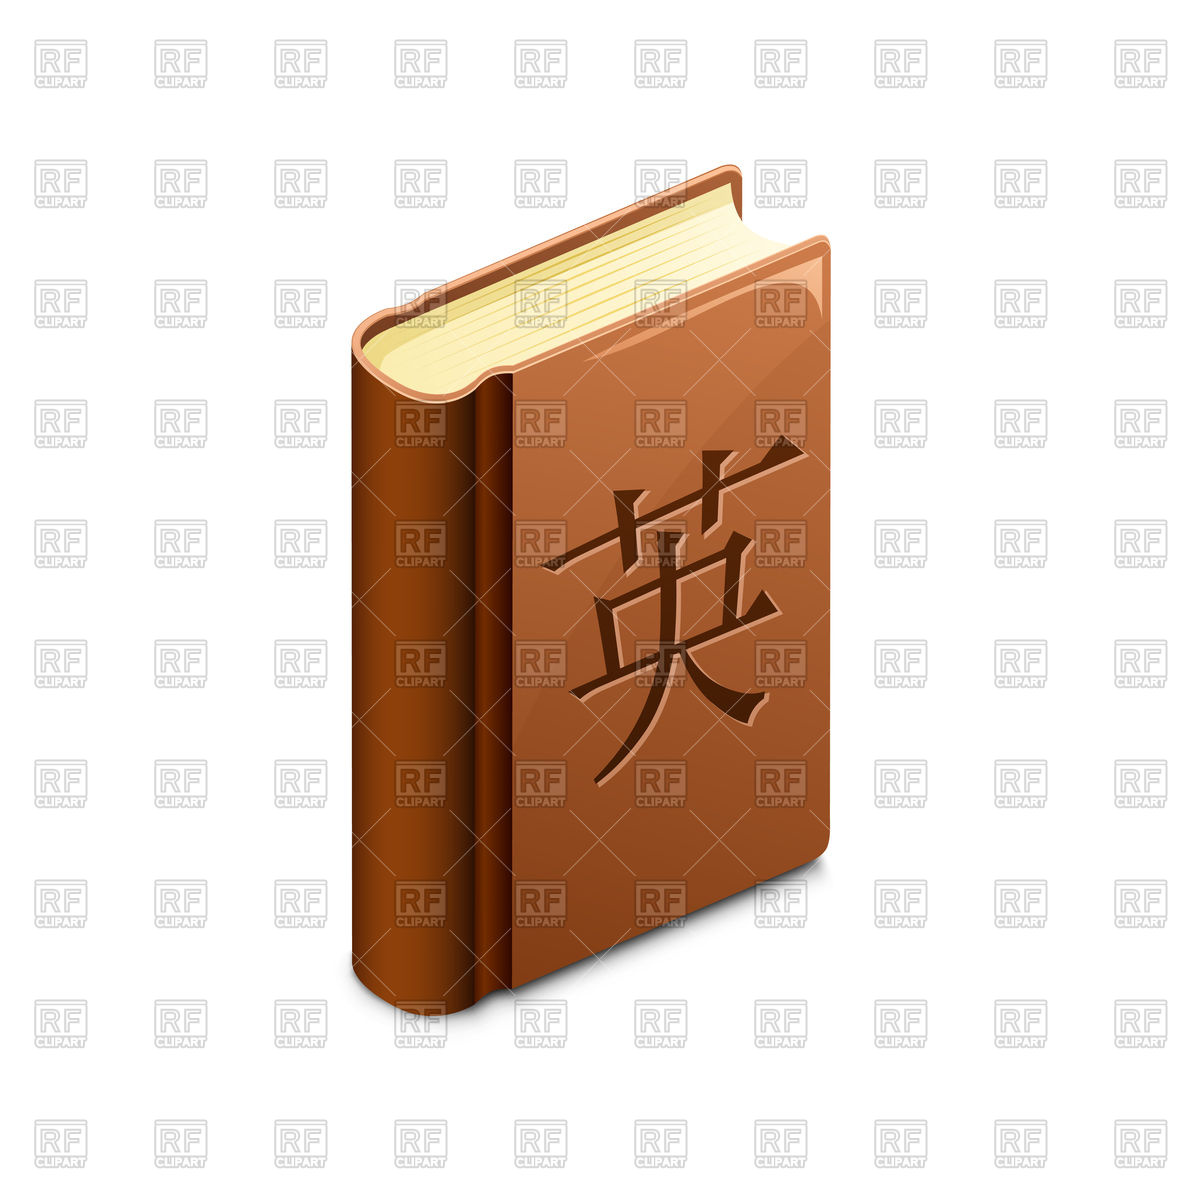 Learning Chinese Language Concept   Dictionary With Chinese Character